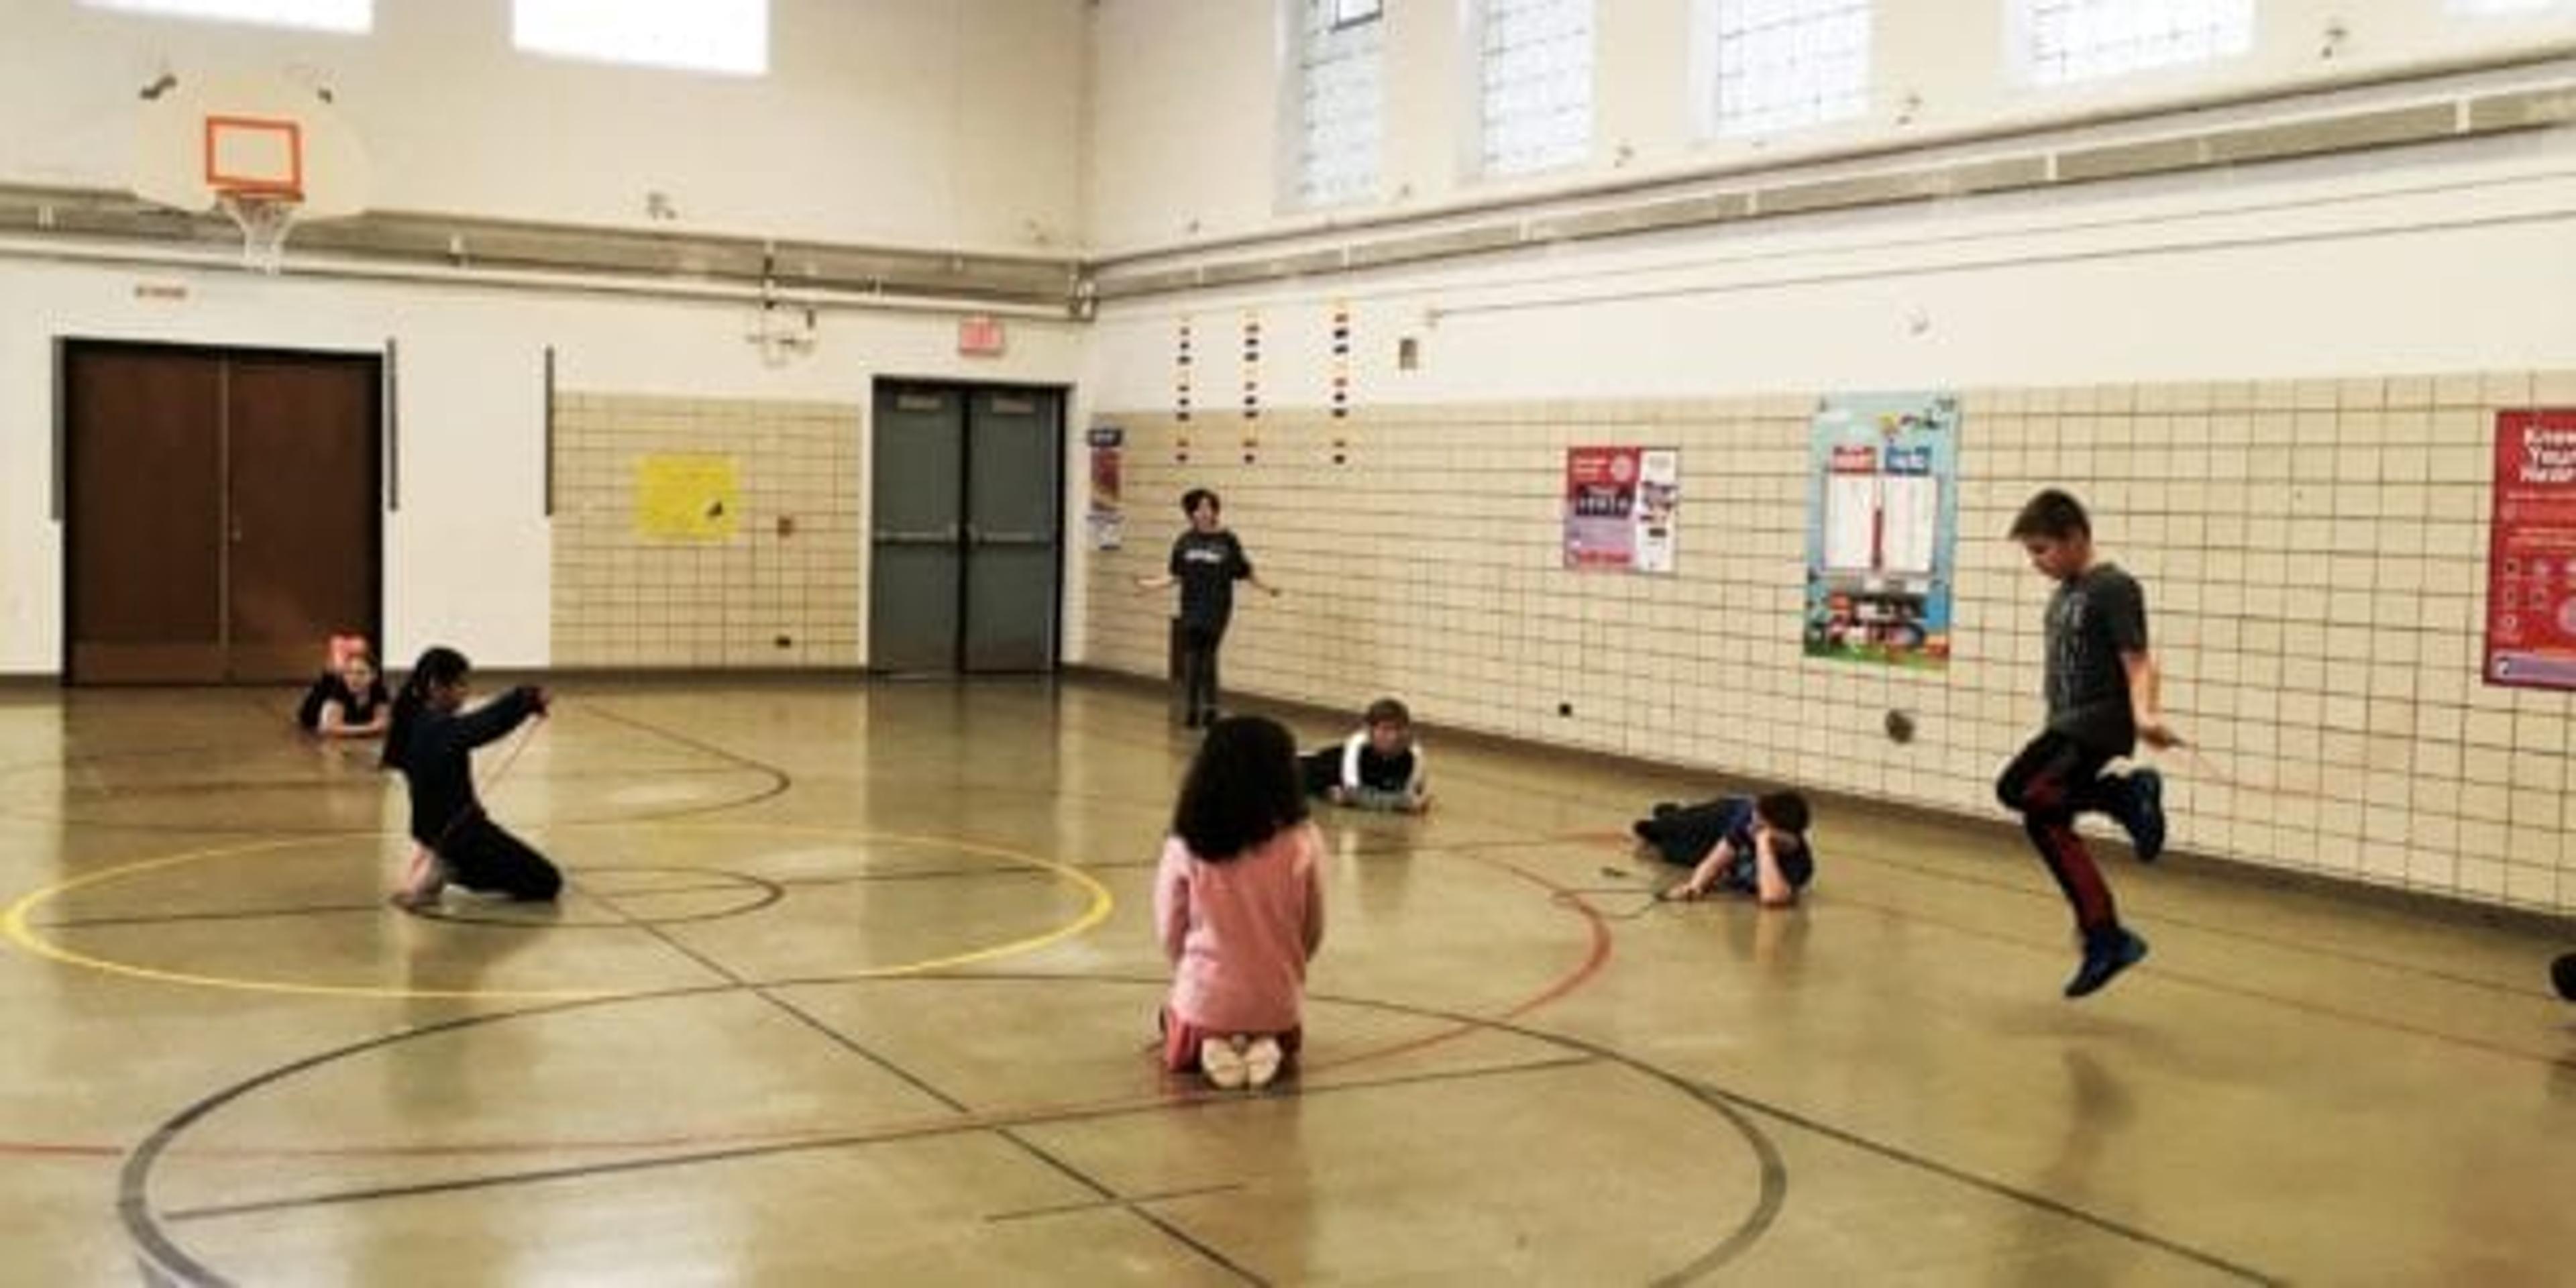 Children jump rope in a gym